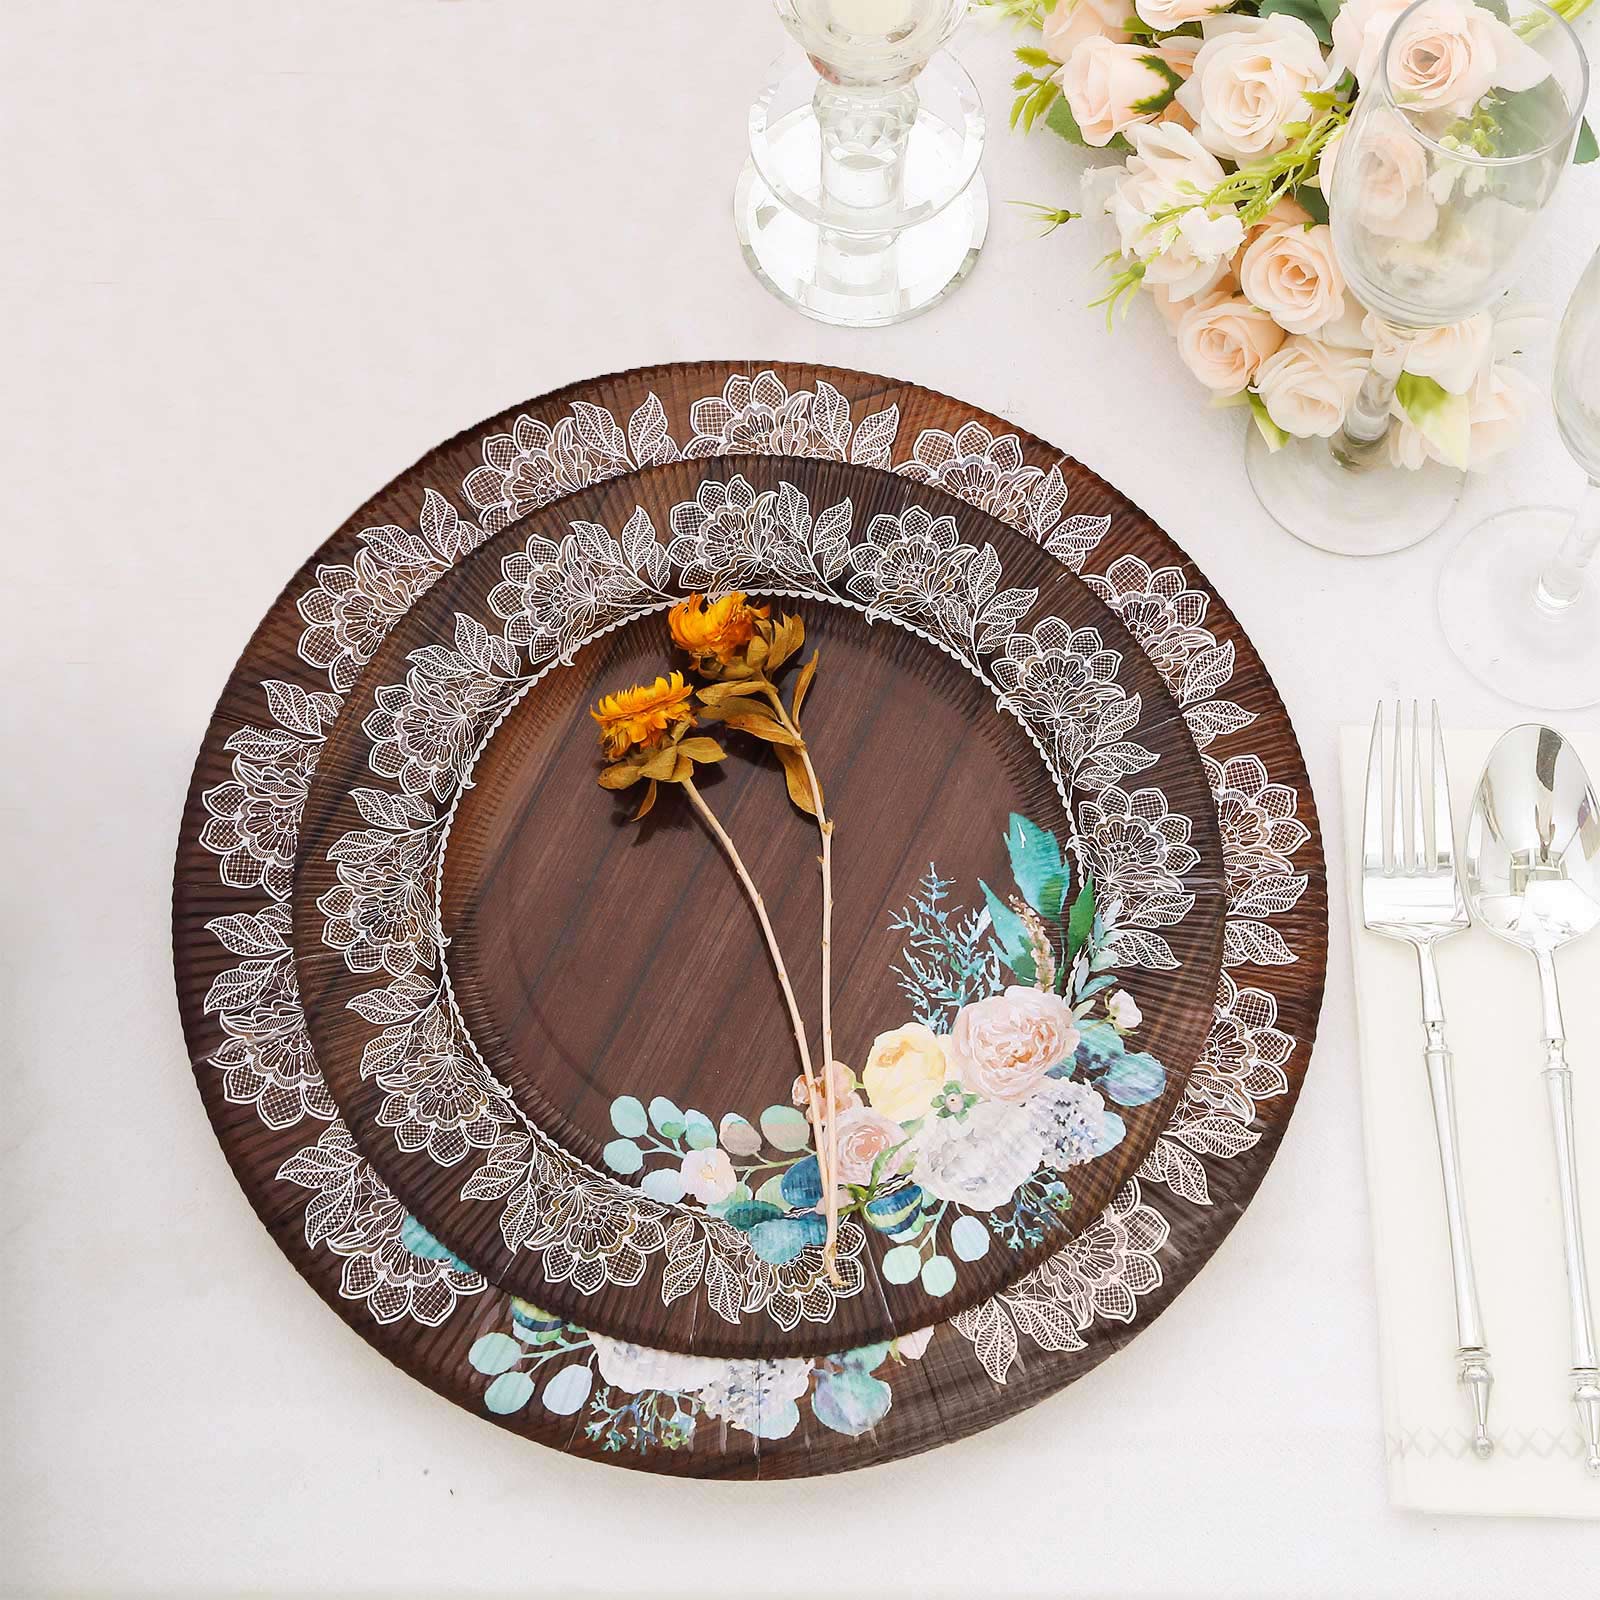 25 Brown 8 in Wood Print Disposable Dessert Paper Plates with Floral Lace Trim